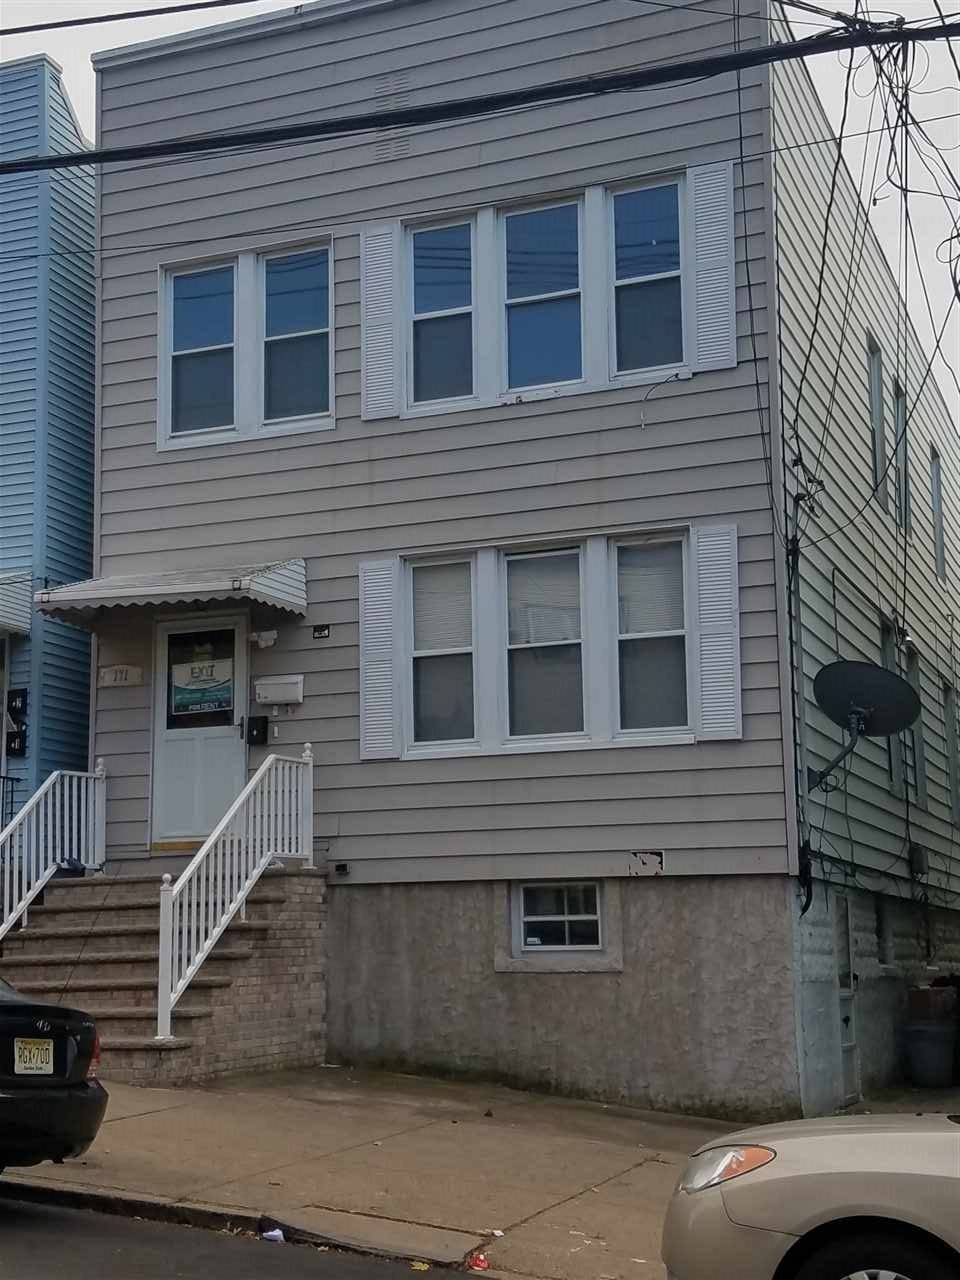 Price Just Reduced - 2 BR New Jersey